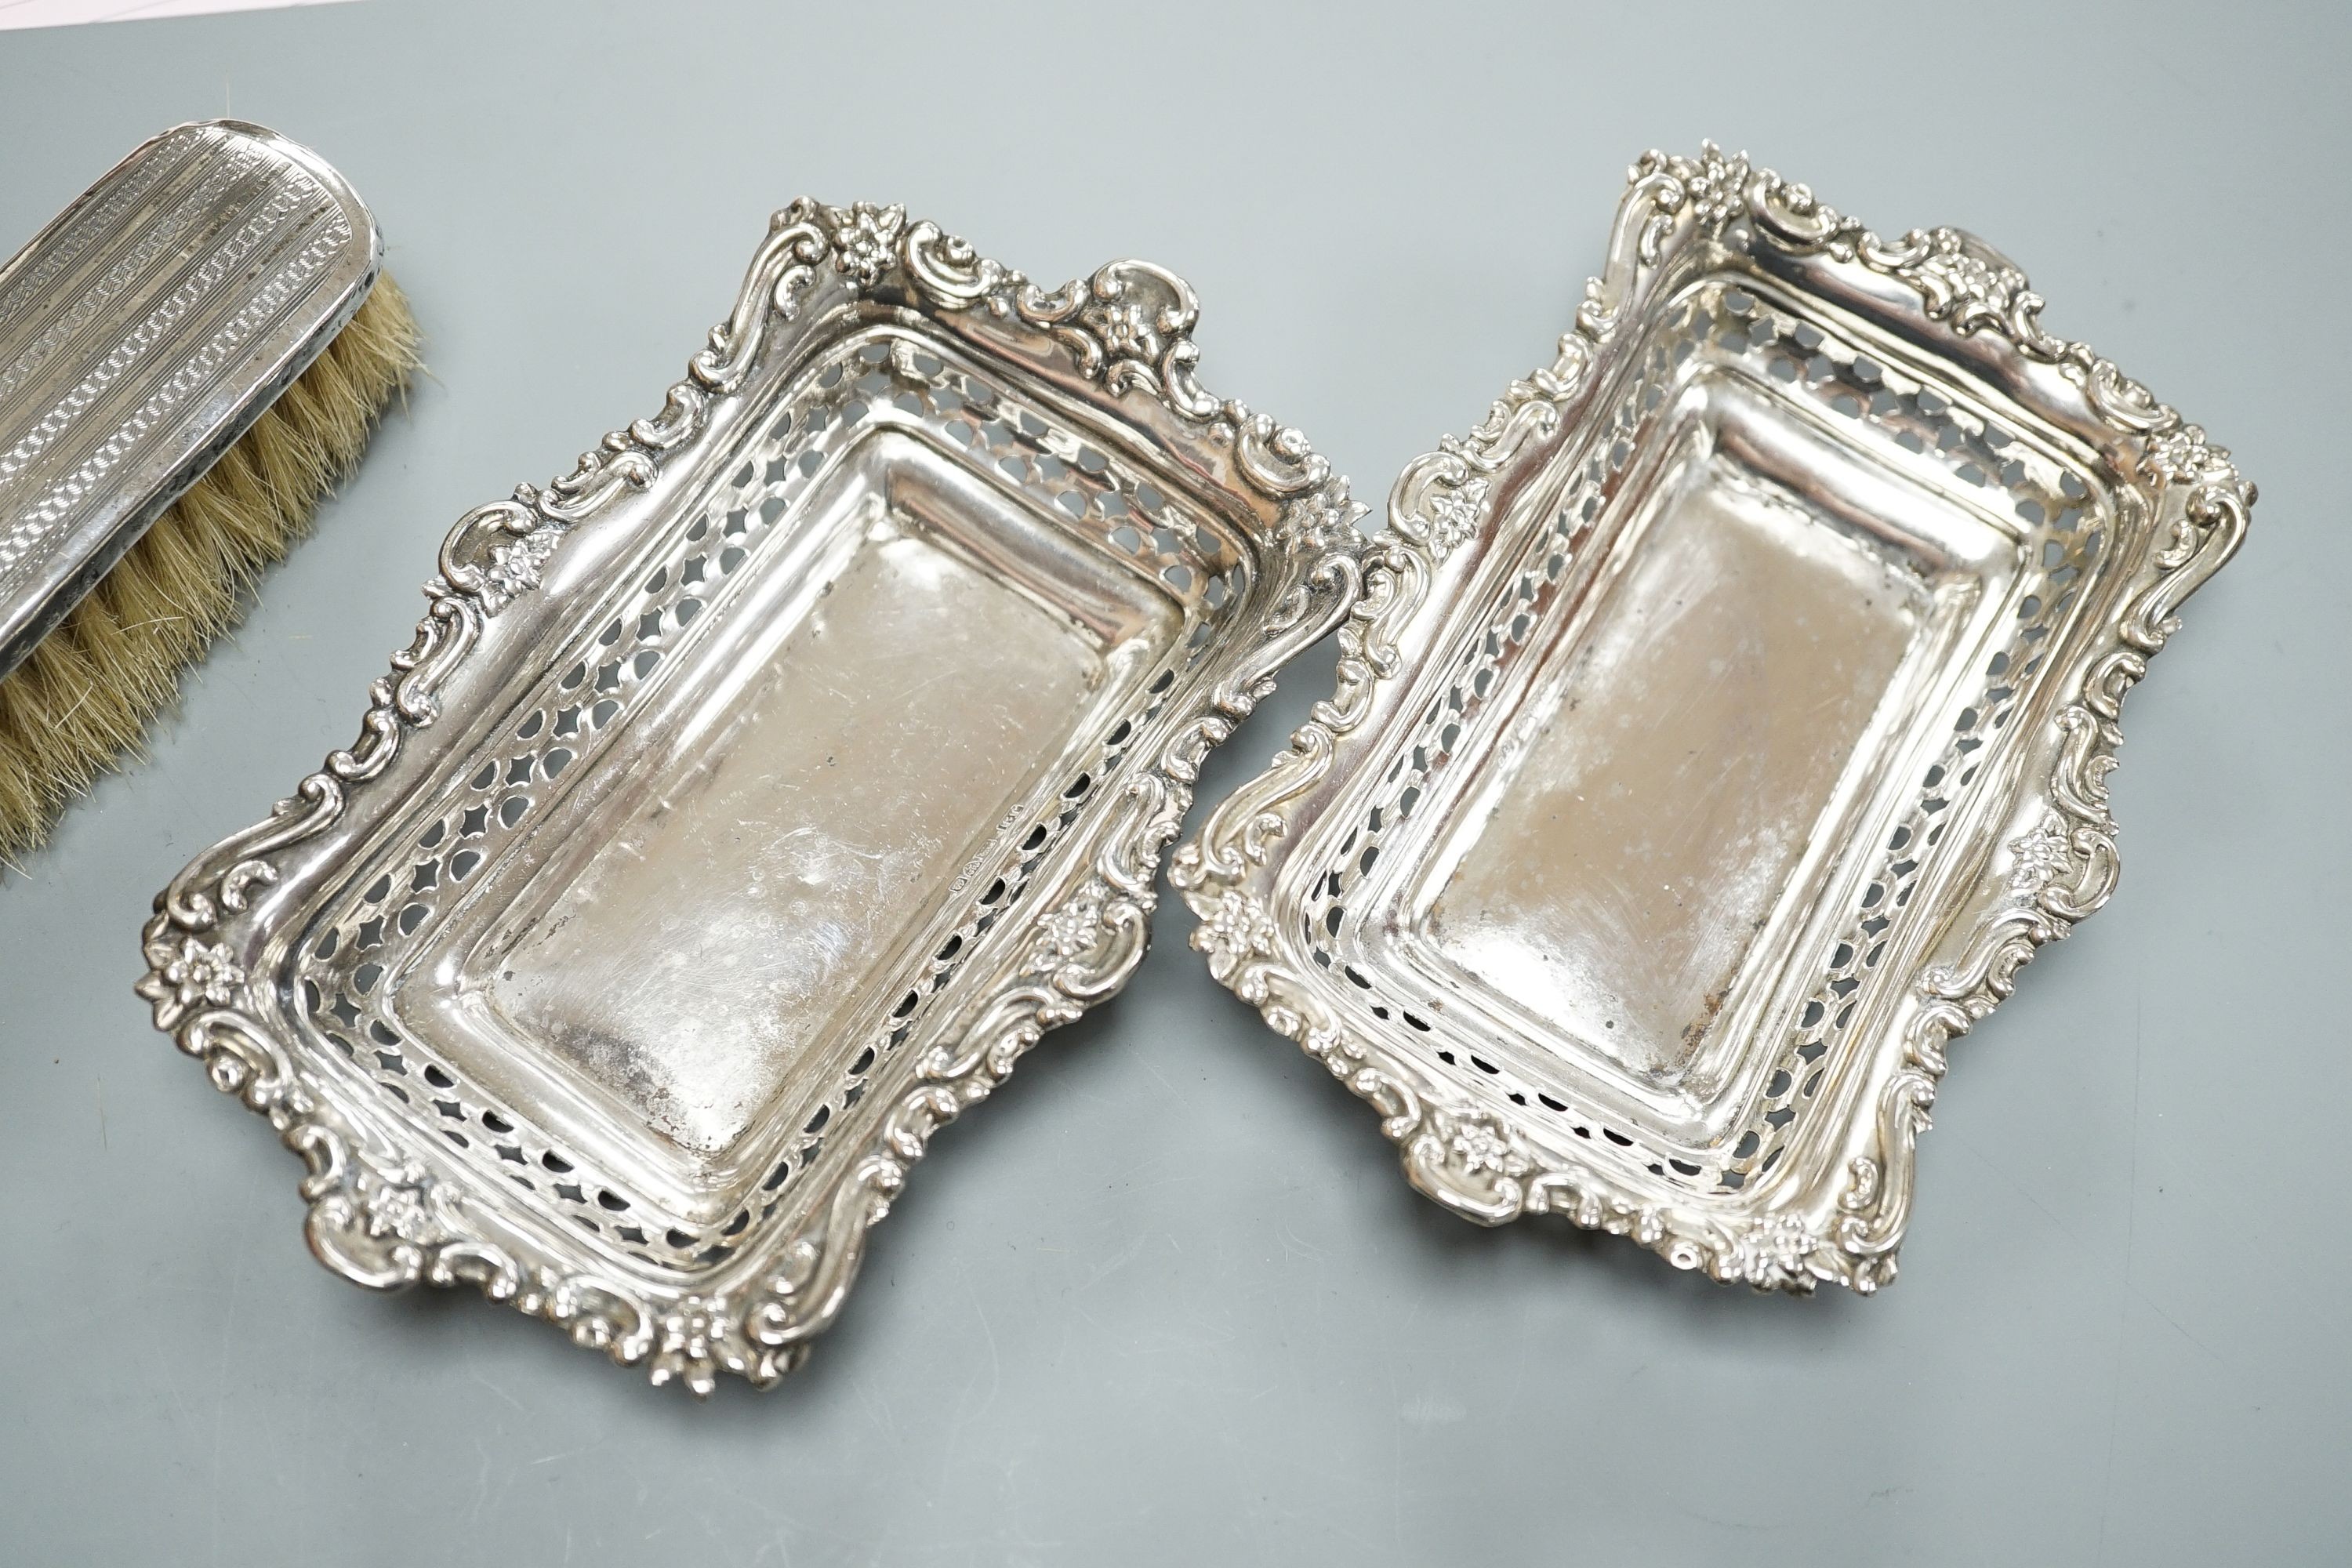 A pair of Edwardian pierced silver bonbon dishes, Chester, 1902, 16.1cm, 4.5oz, a silver and mother of pearl fruit knife, silver cased penknife and silver mounted clothes brush and a modern silver cased pocket torch.